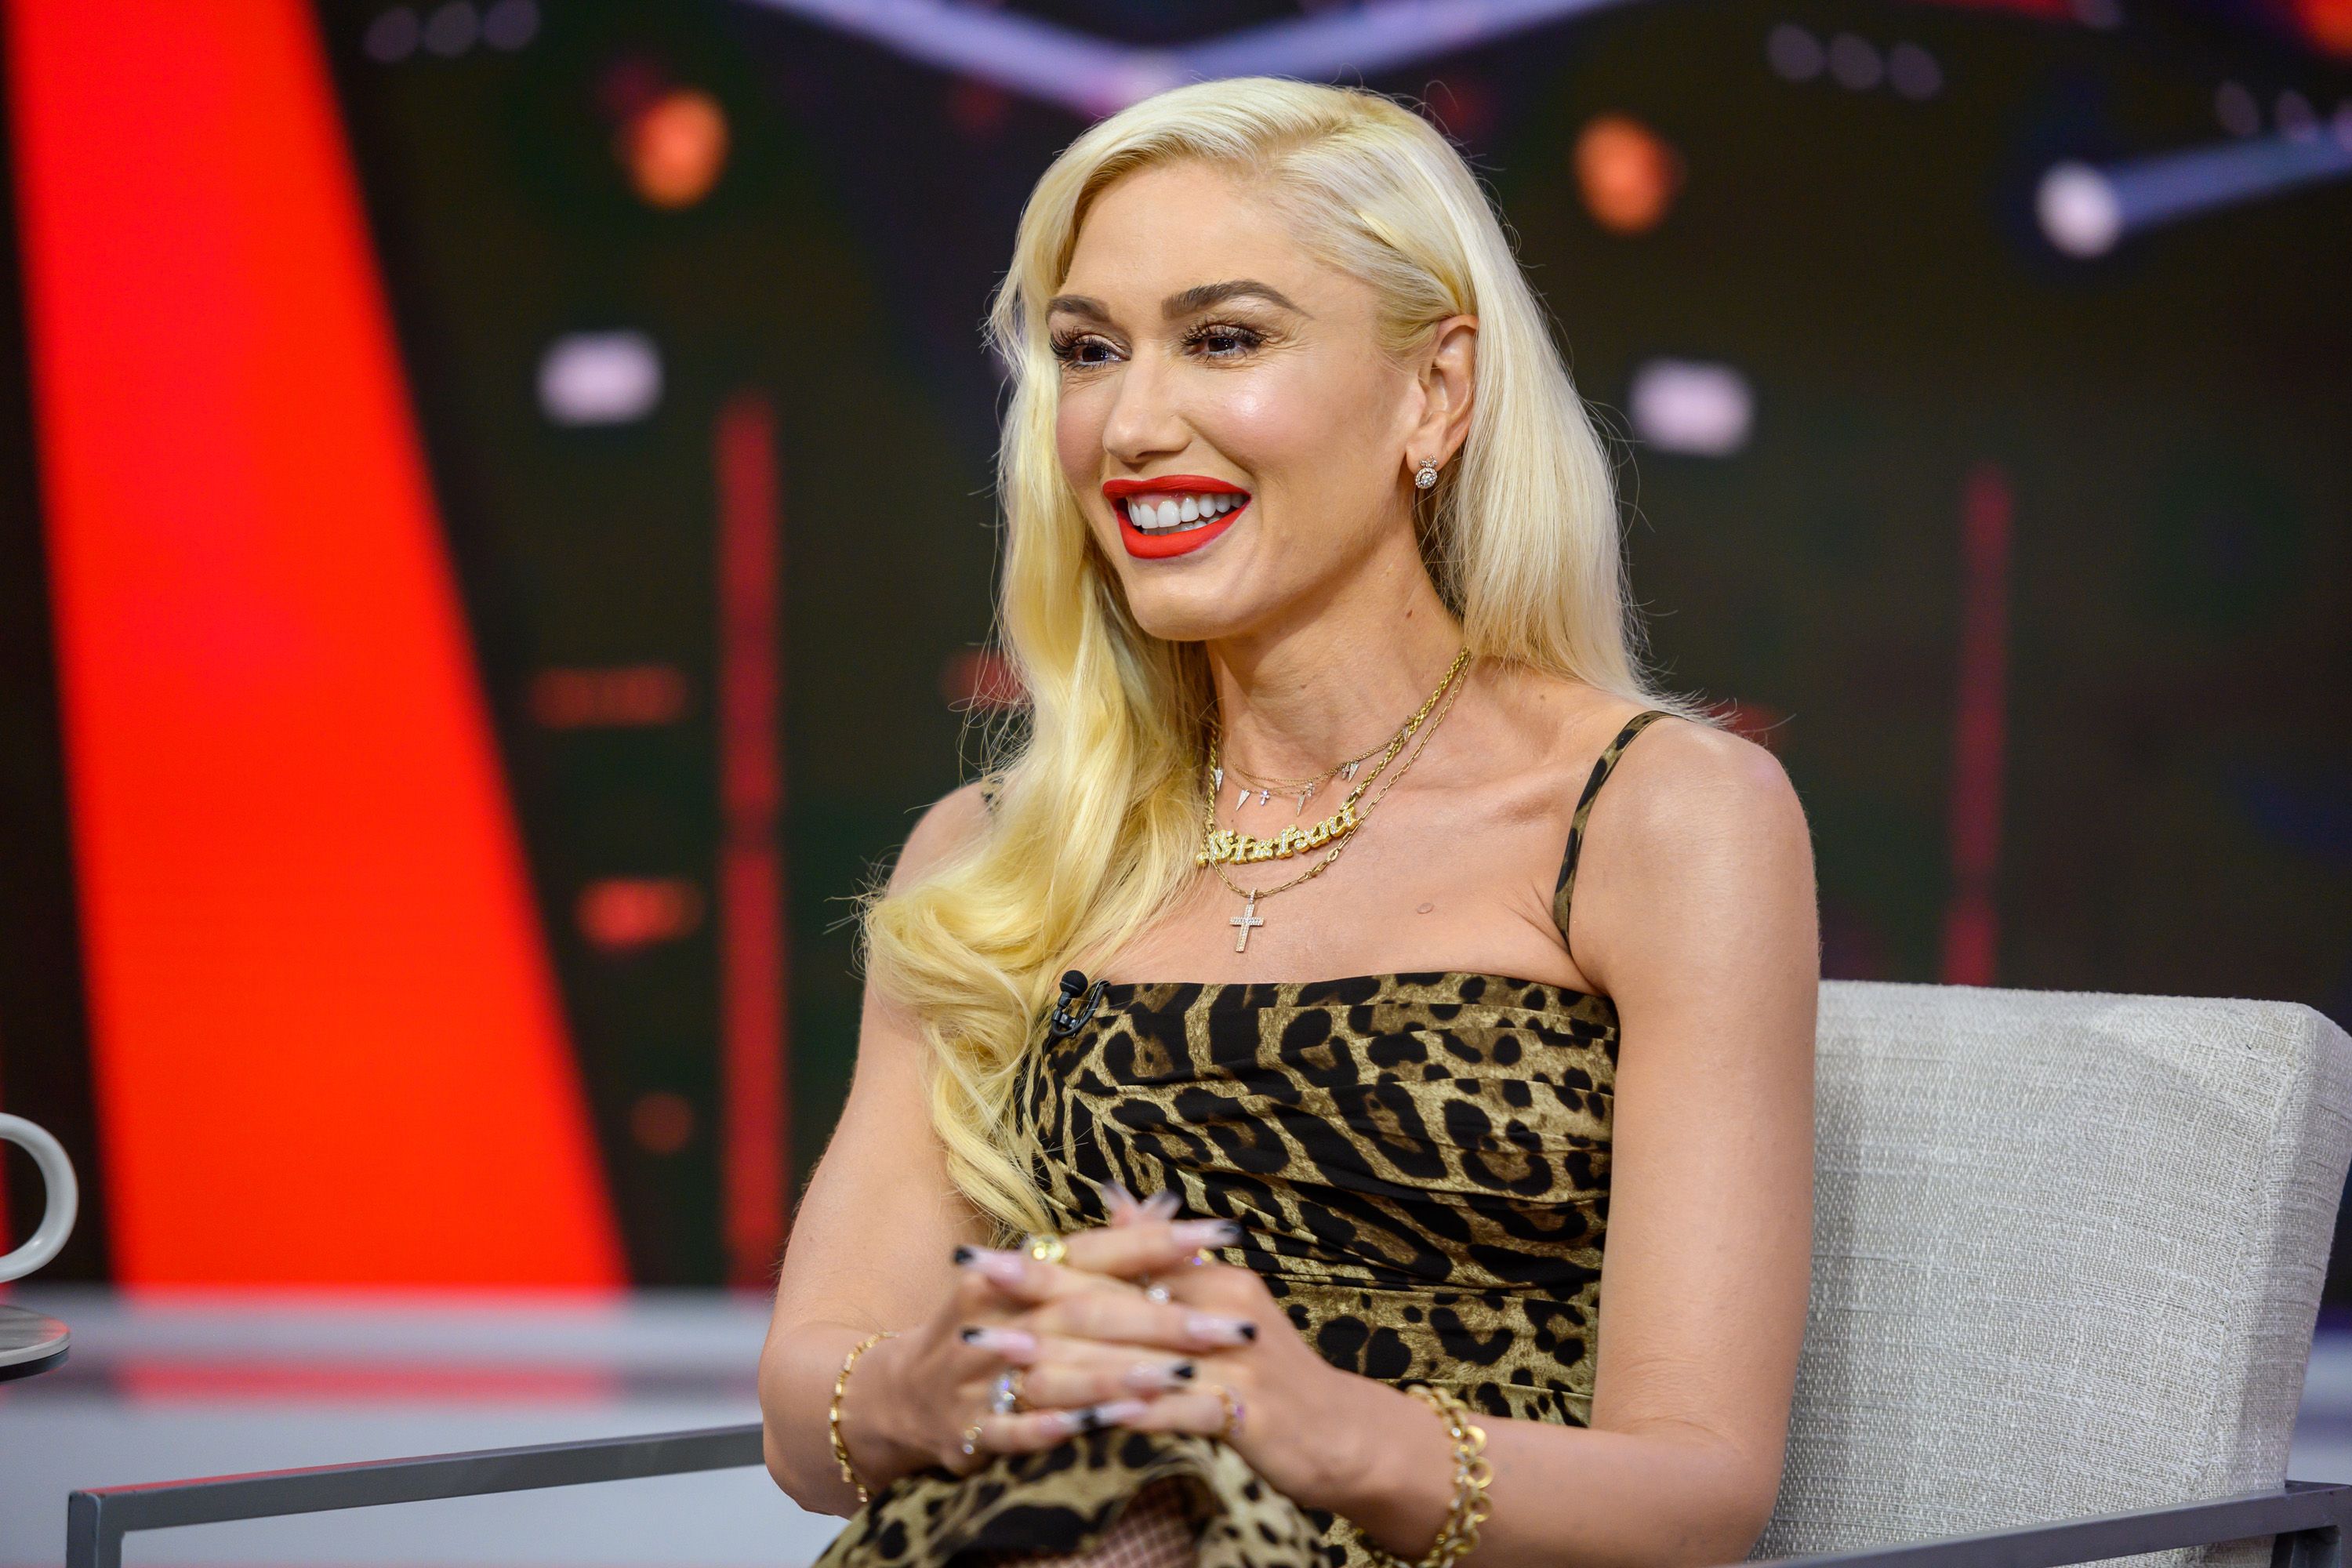 Gwen Stefani on the set of the "Today" show on September 23, 2019 | Photo: Nathan Congleton/NBCU Photo Bank/NBCUniversal/Getty Images